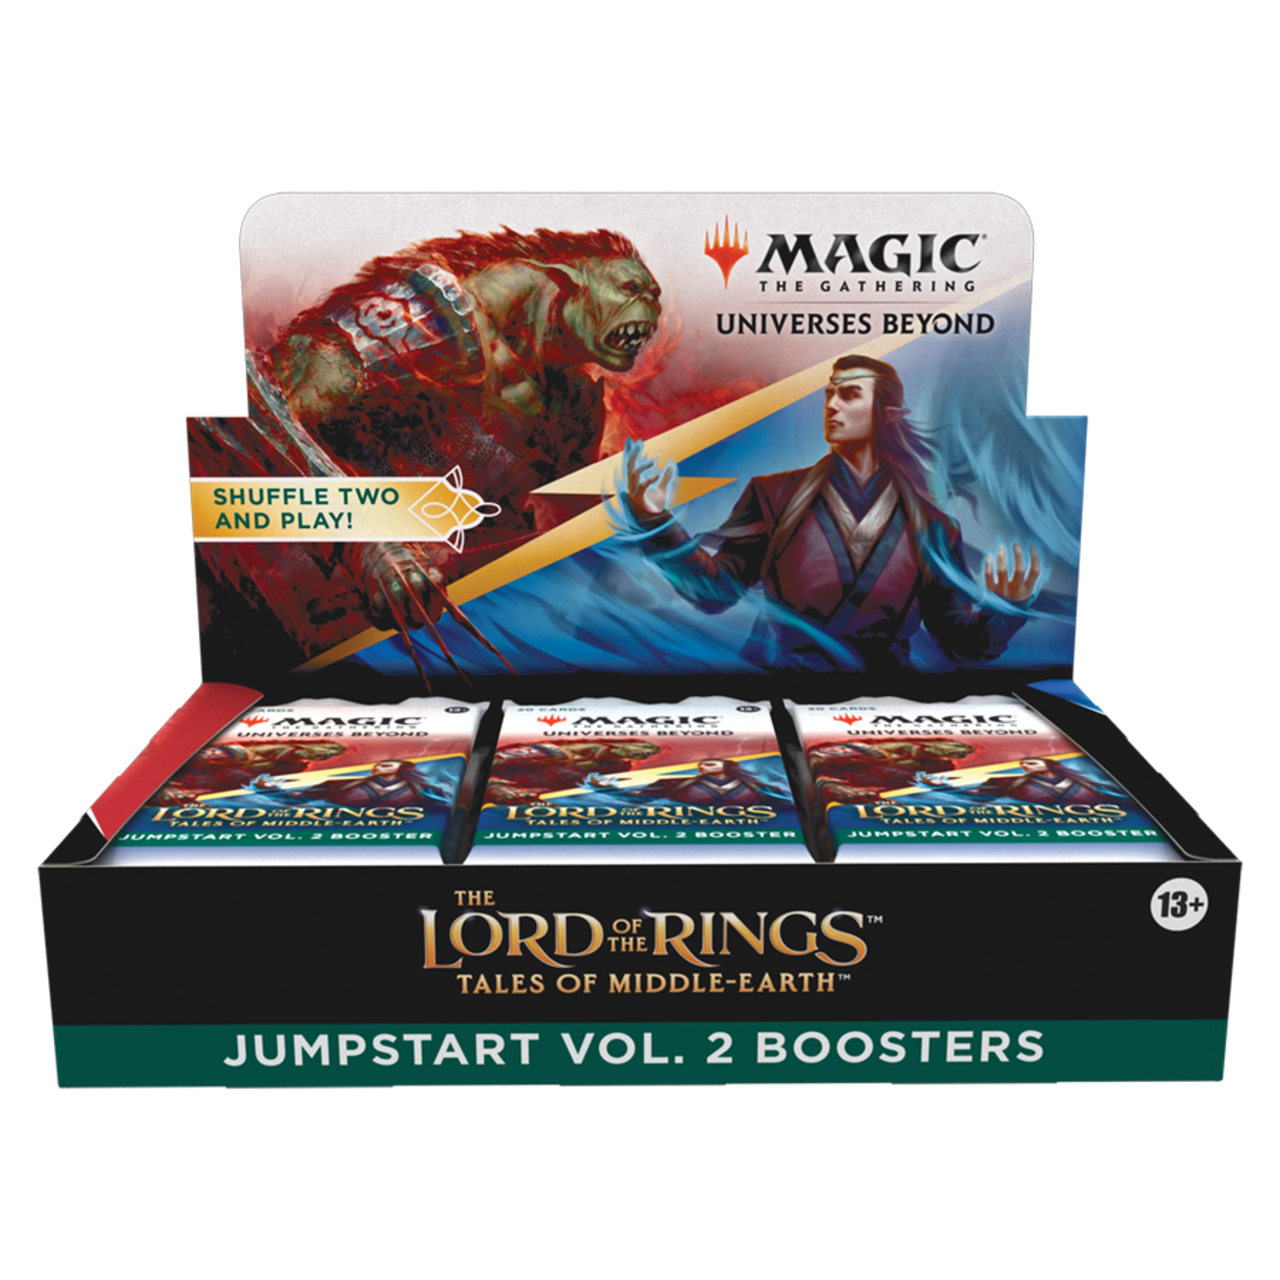 Magic the Gathering The Lord of the Rings: Tales of Middle-earth Vol. 2 Jumpstart Booster Box